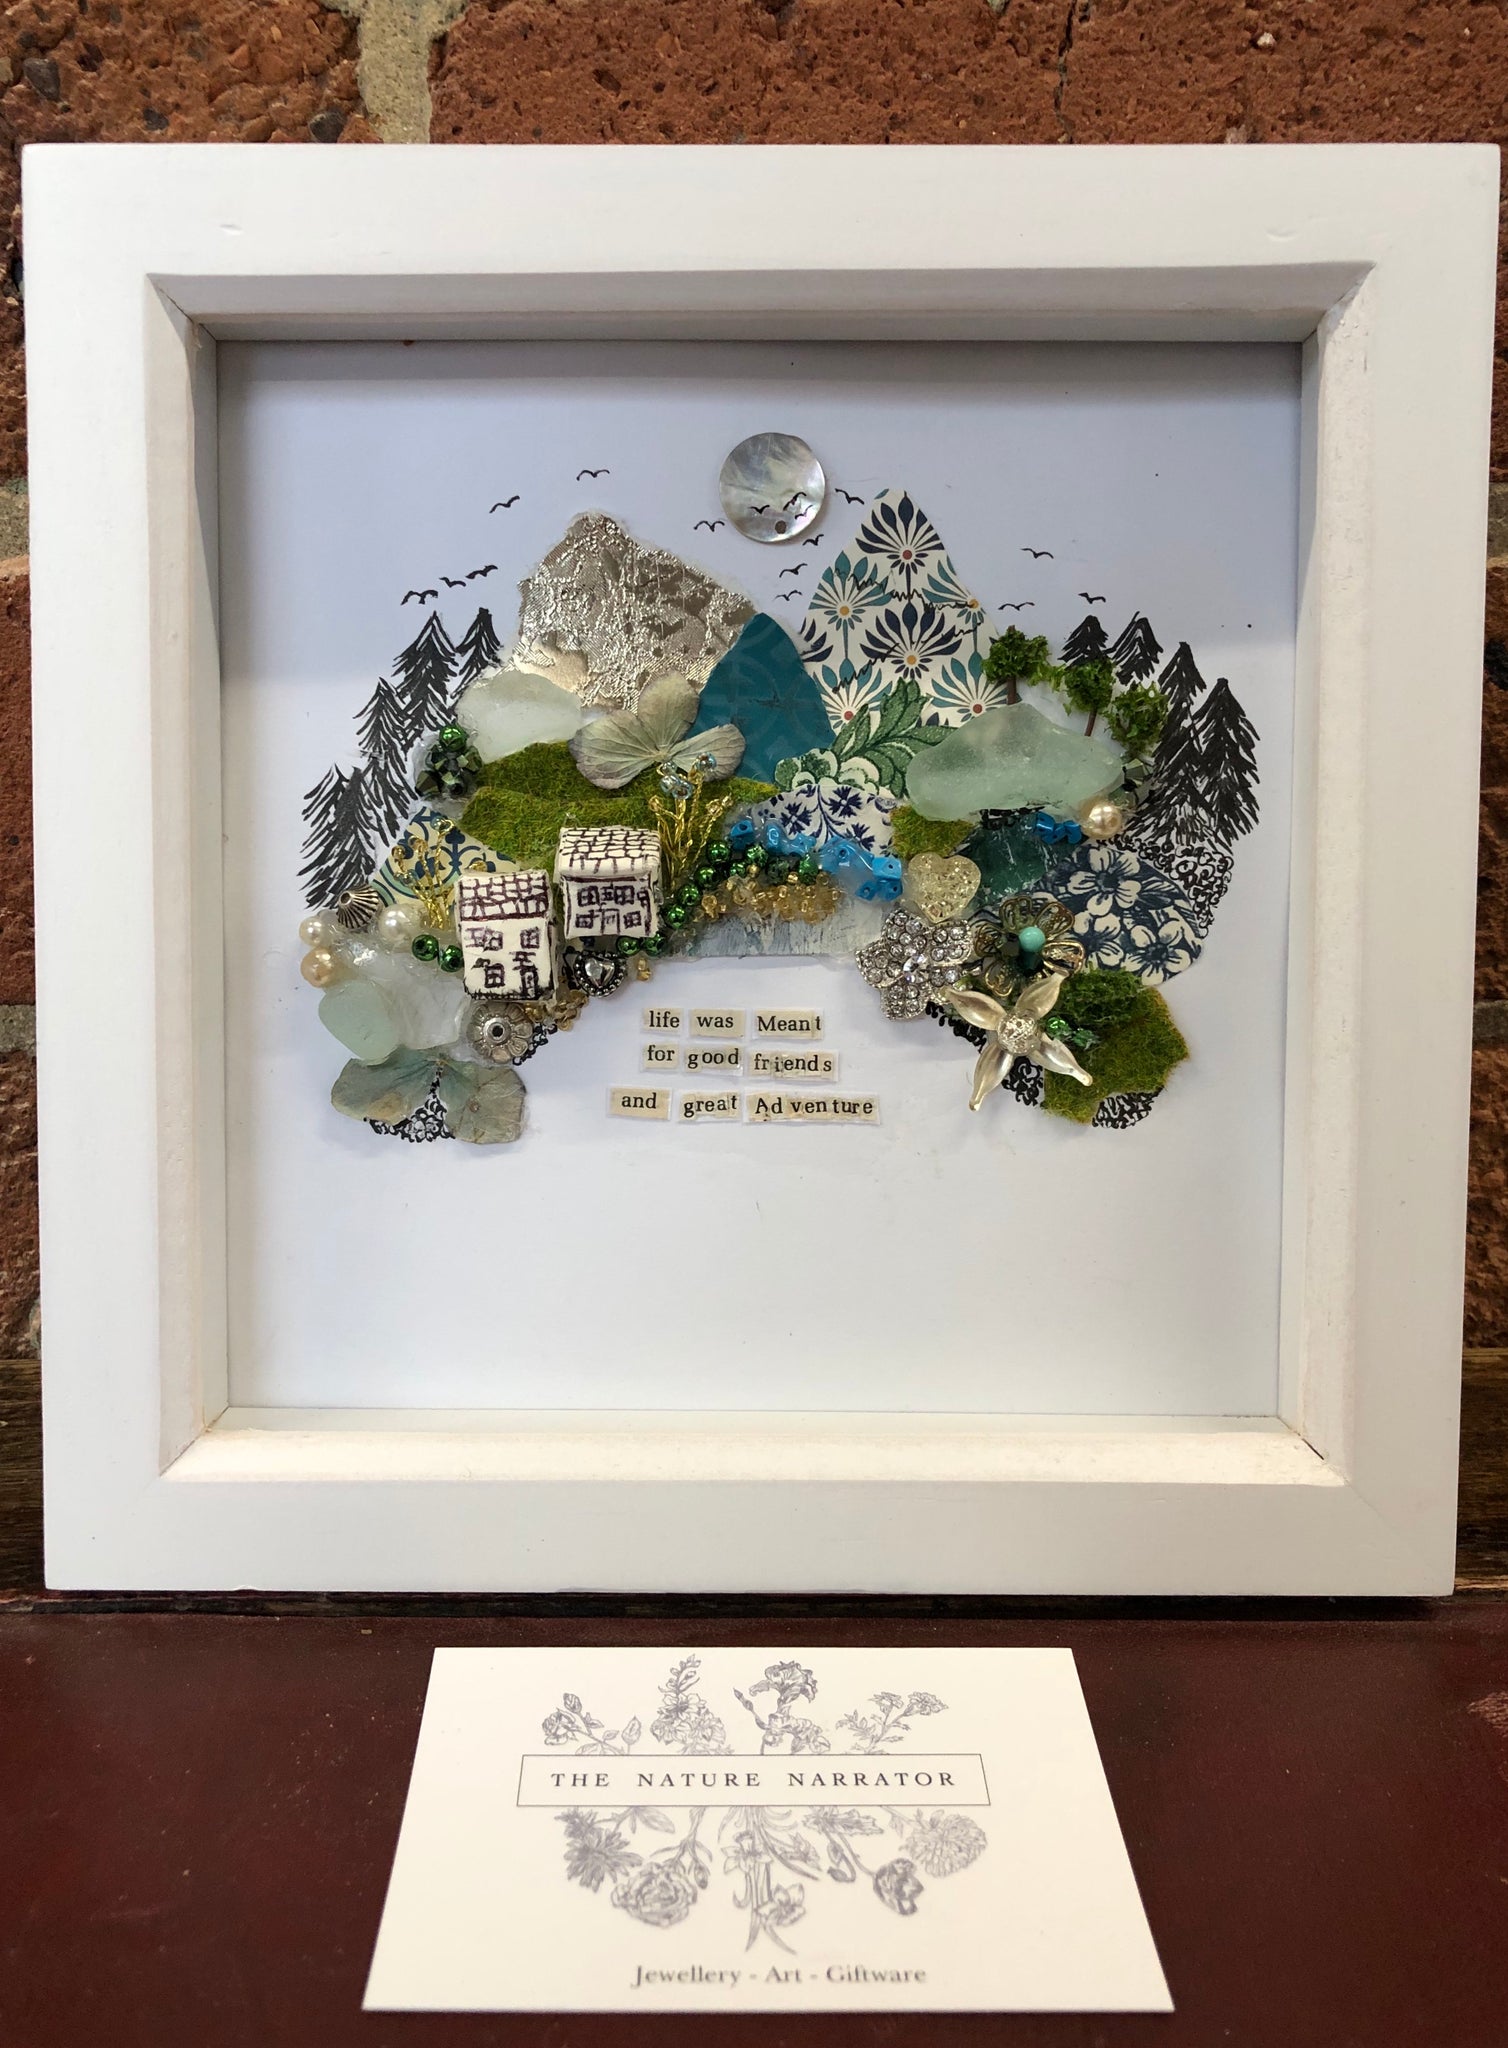 Life was meant for good friends and great adventures Shadow box message artwork